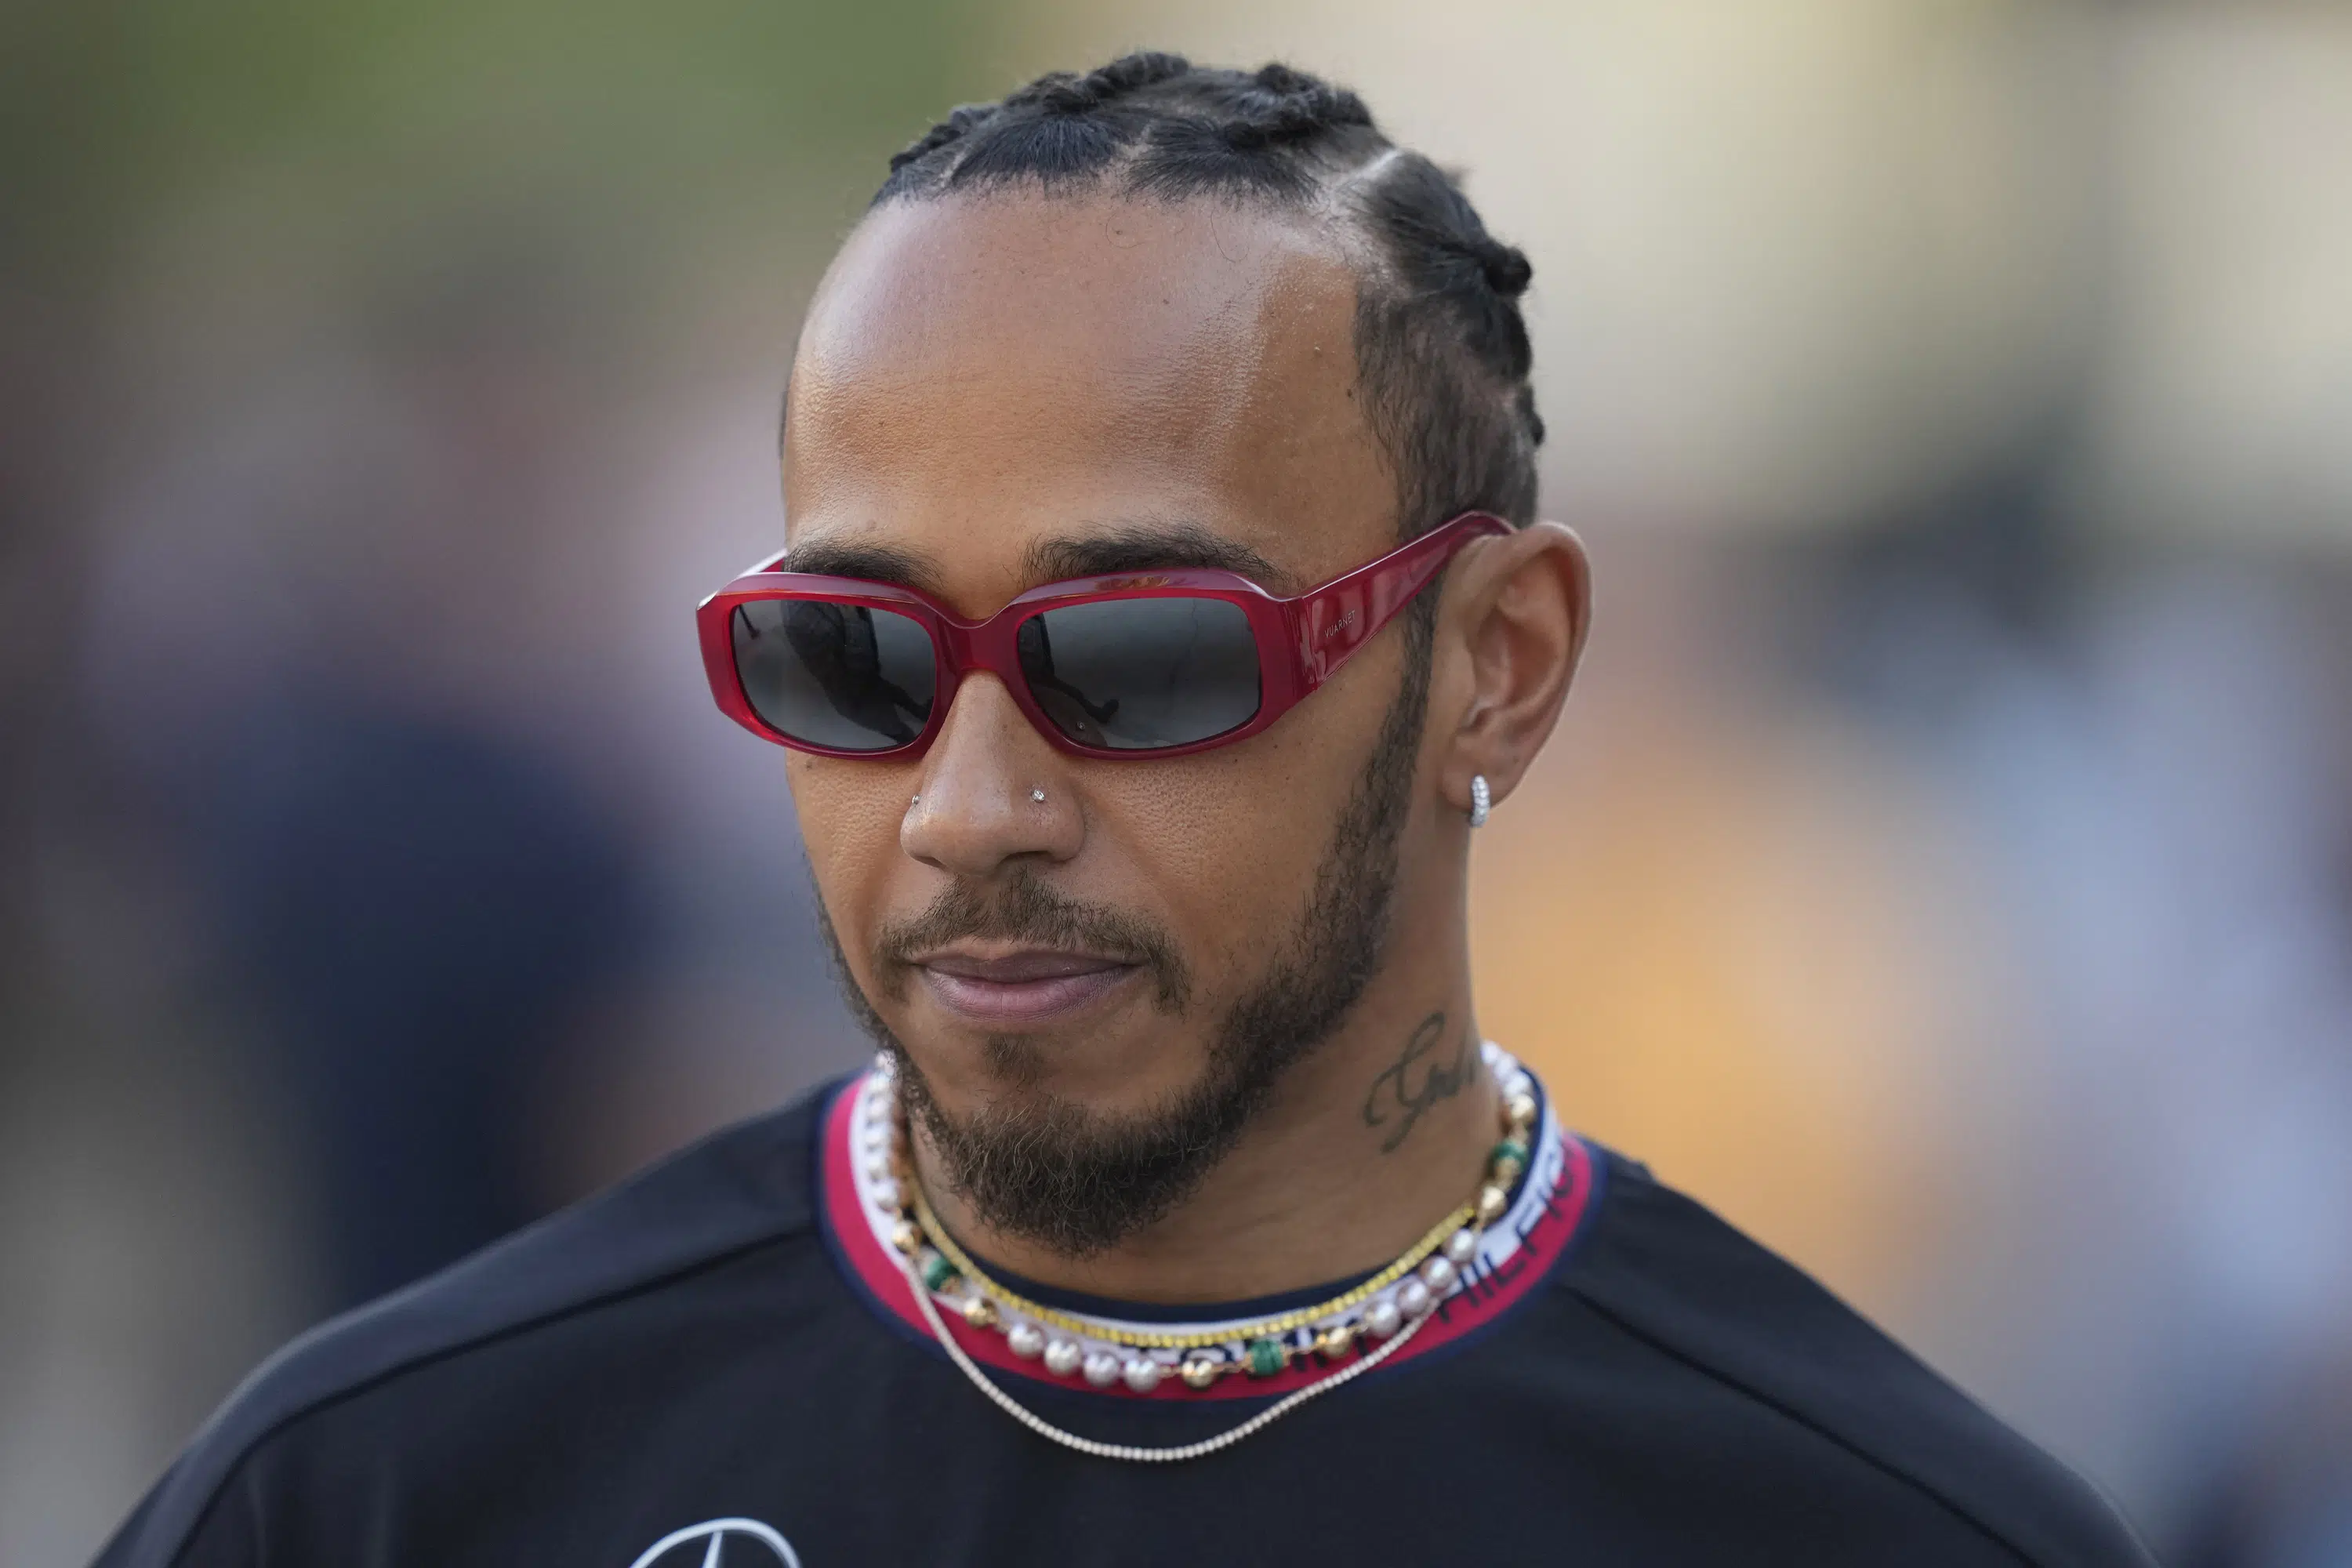 Hamilton cleared to race in Bahrain right after jewellery inspected